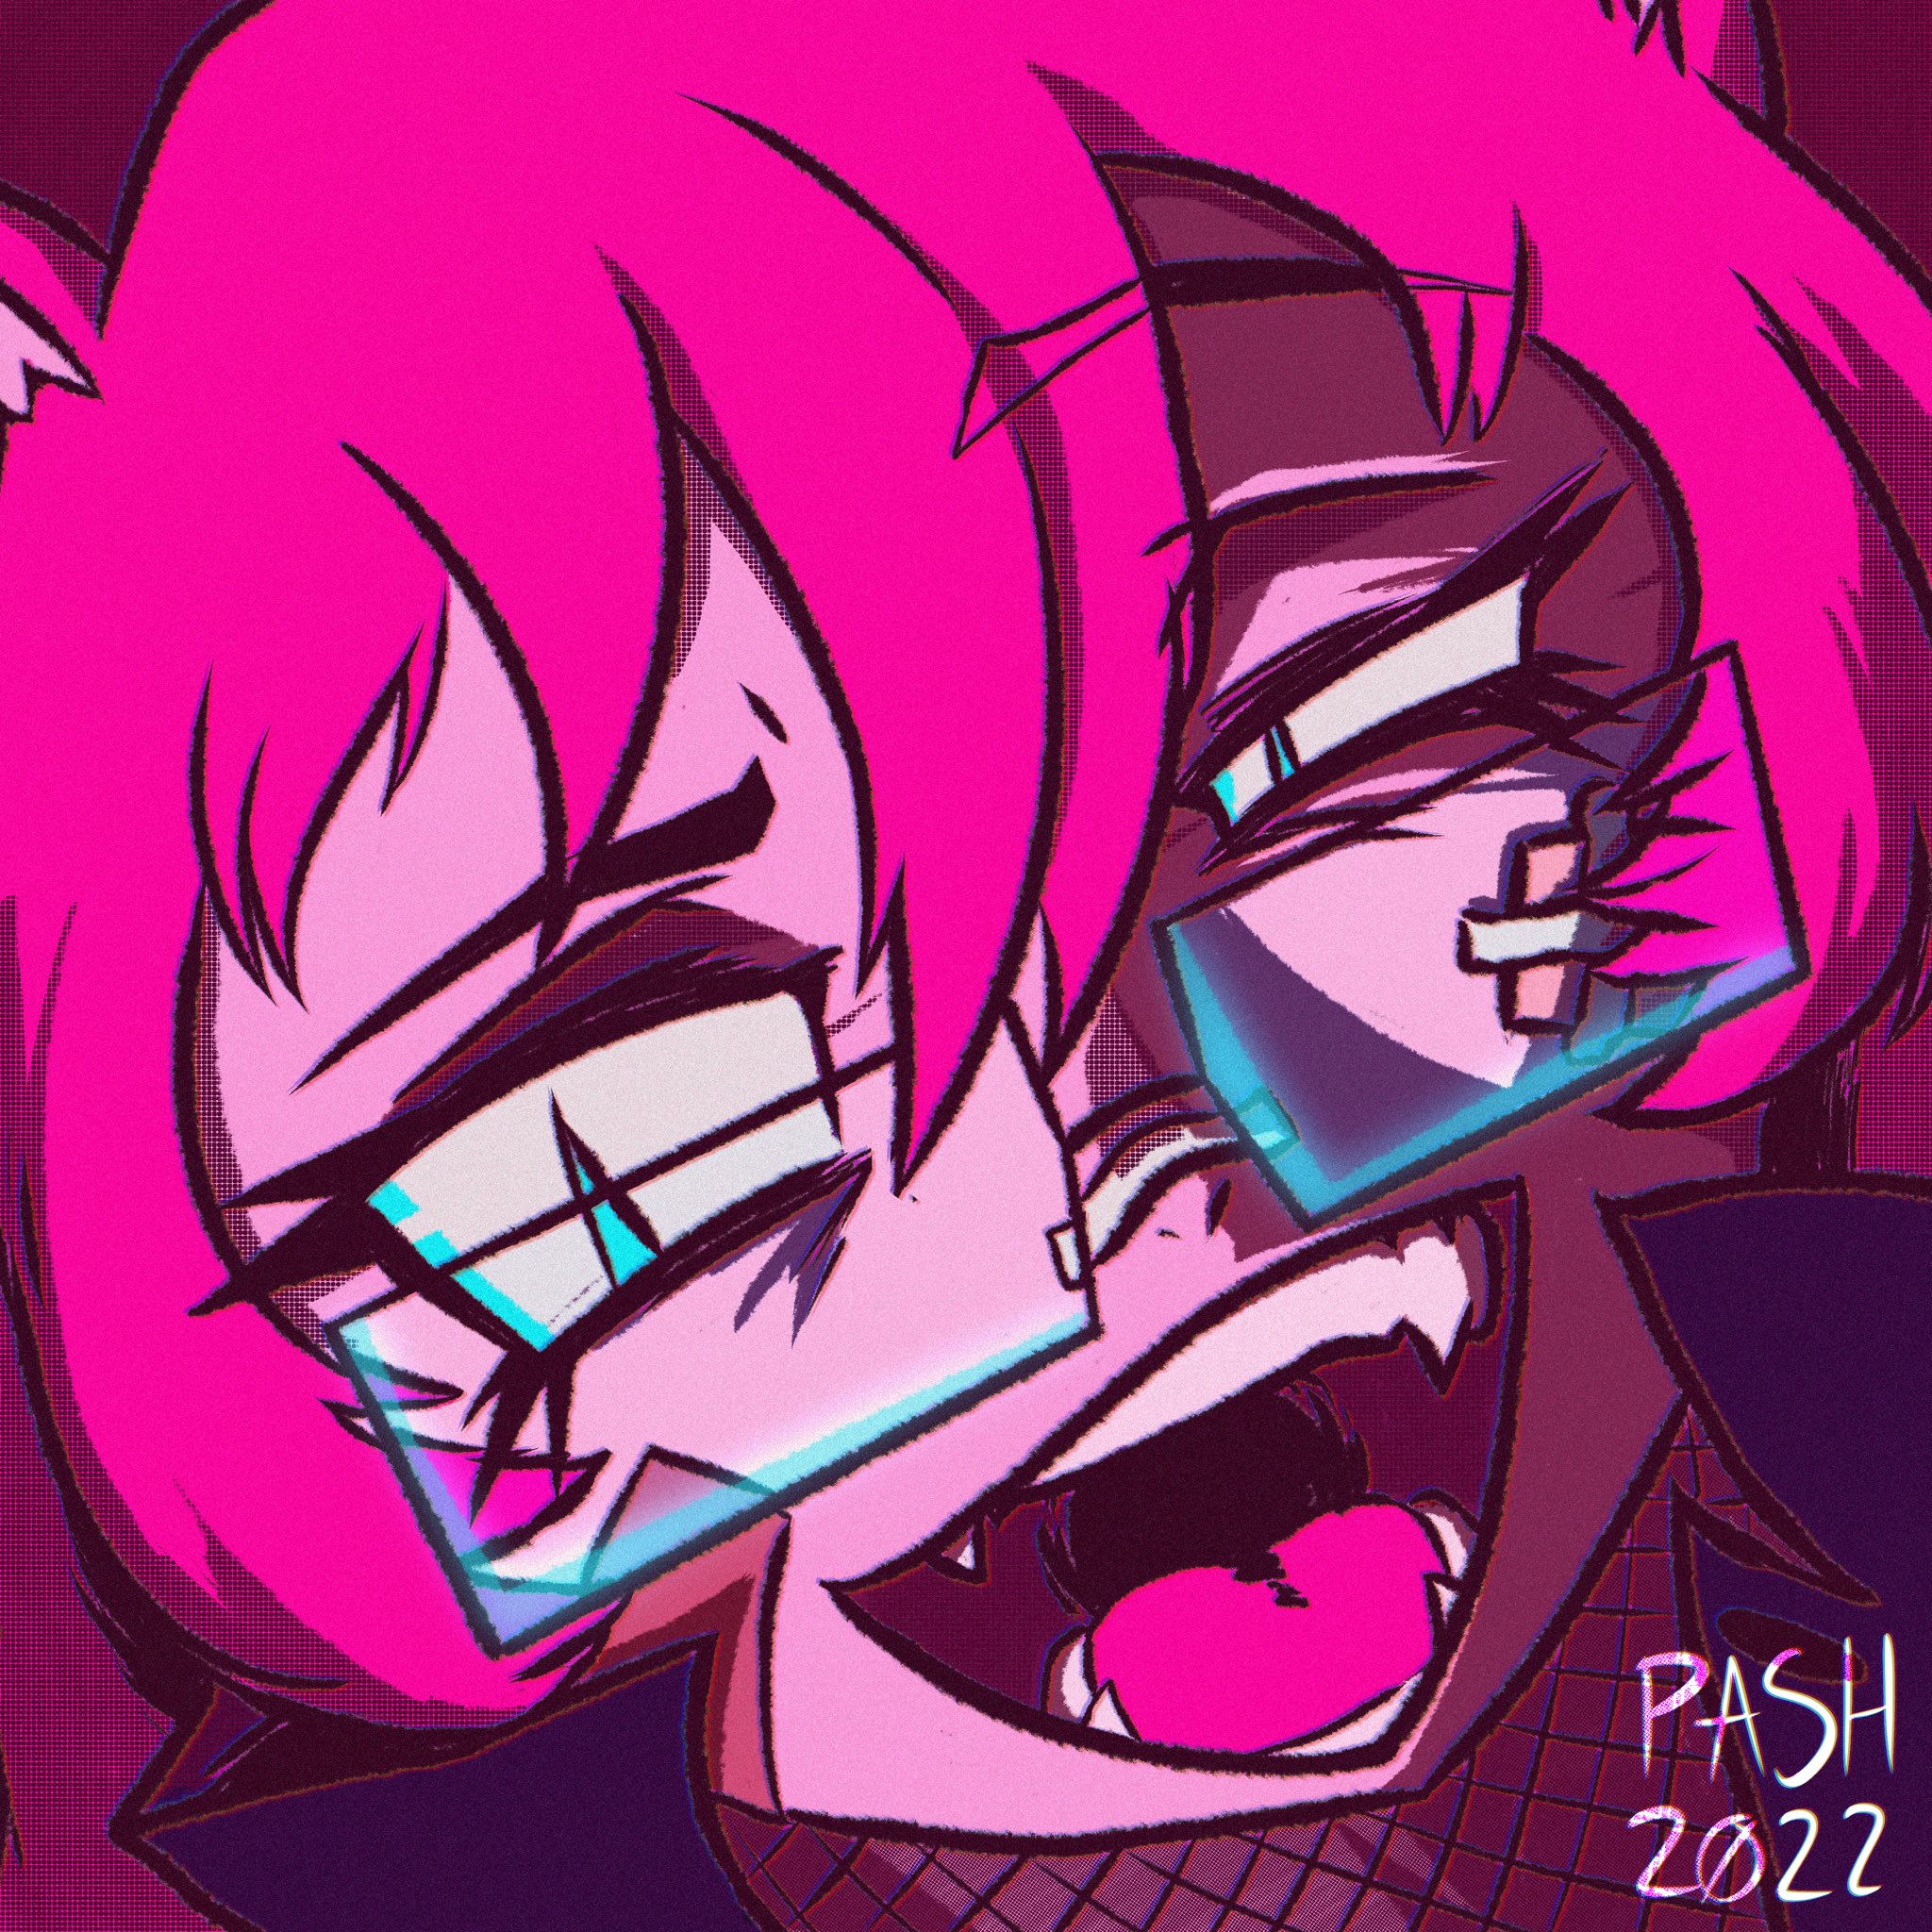 the face of a catgirl character, she has hot pink hair and her cat ears are barely visible due to being cut off by the edges of the image, she wears rectangular glasses, has fangs, has a popped leather jacket collar, and a mesh around her neck. She has face bandages and a fiesty facial expression. The artist watermark in the bottom right says Pash 2022